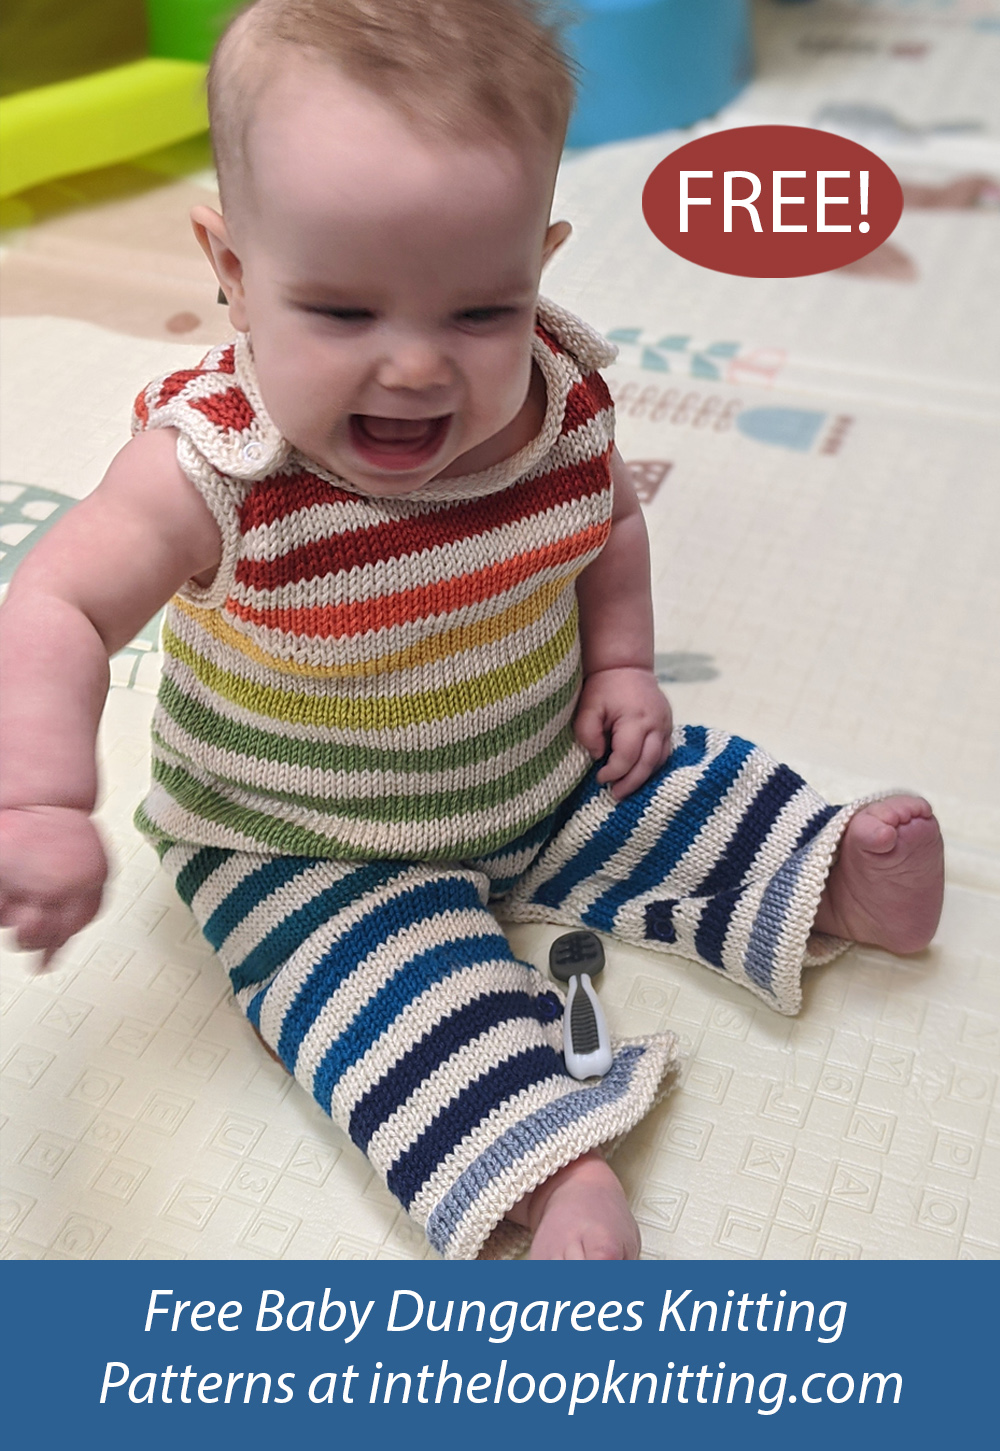 Free knitting pattern for Stripey Baby Dungarees